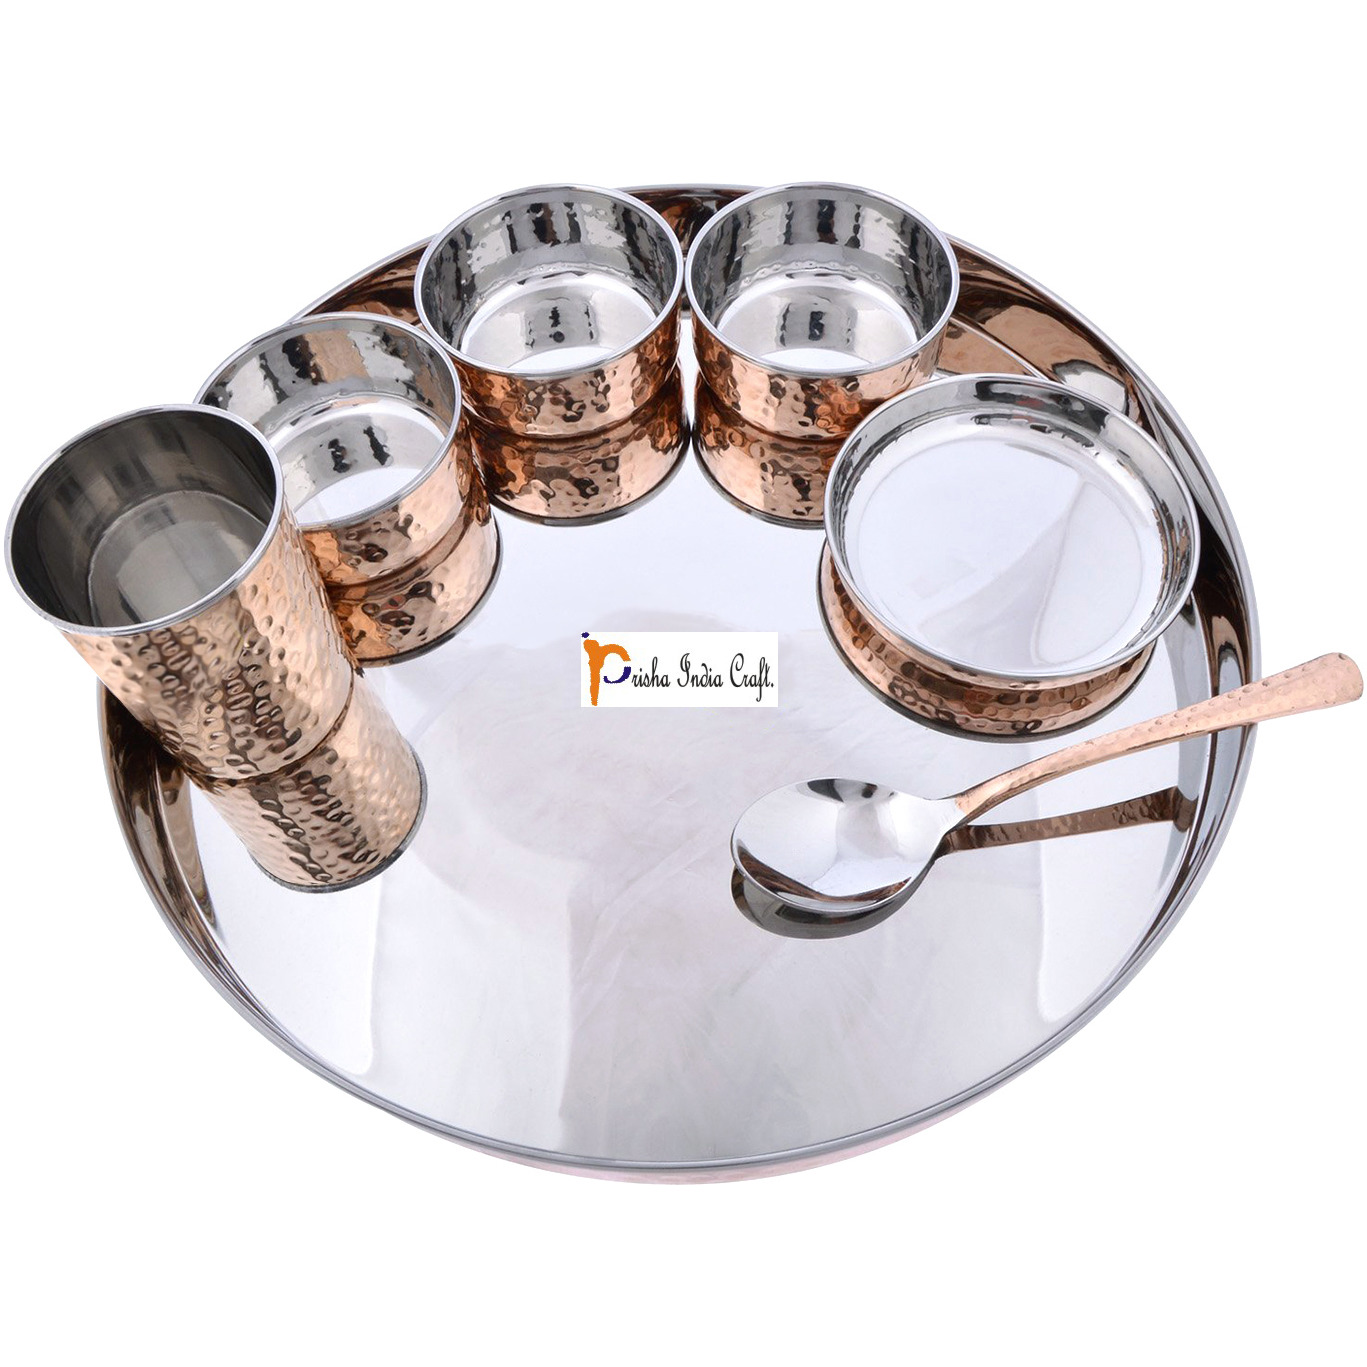 Prisha India Craft B. Set of 5 Dinnerware Traditional Stainless Steel Copper Dinner Set of Thali Plate, Bowls, Glass and Spoon, Dia 13  With 1 Pure Copper Hammered Pitcher Jug - Christmas Gift